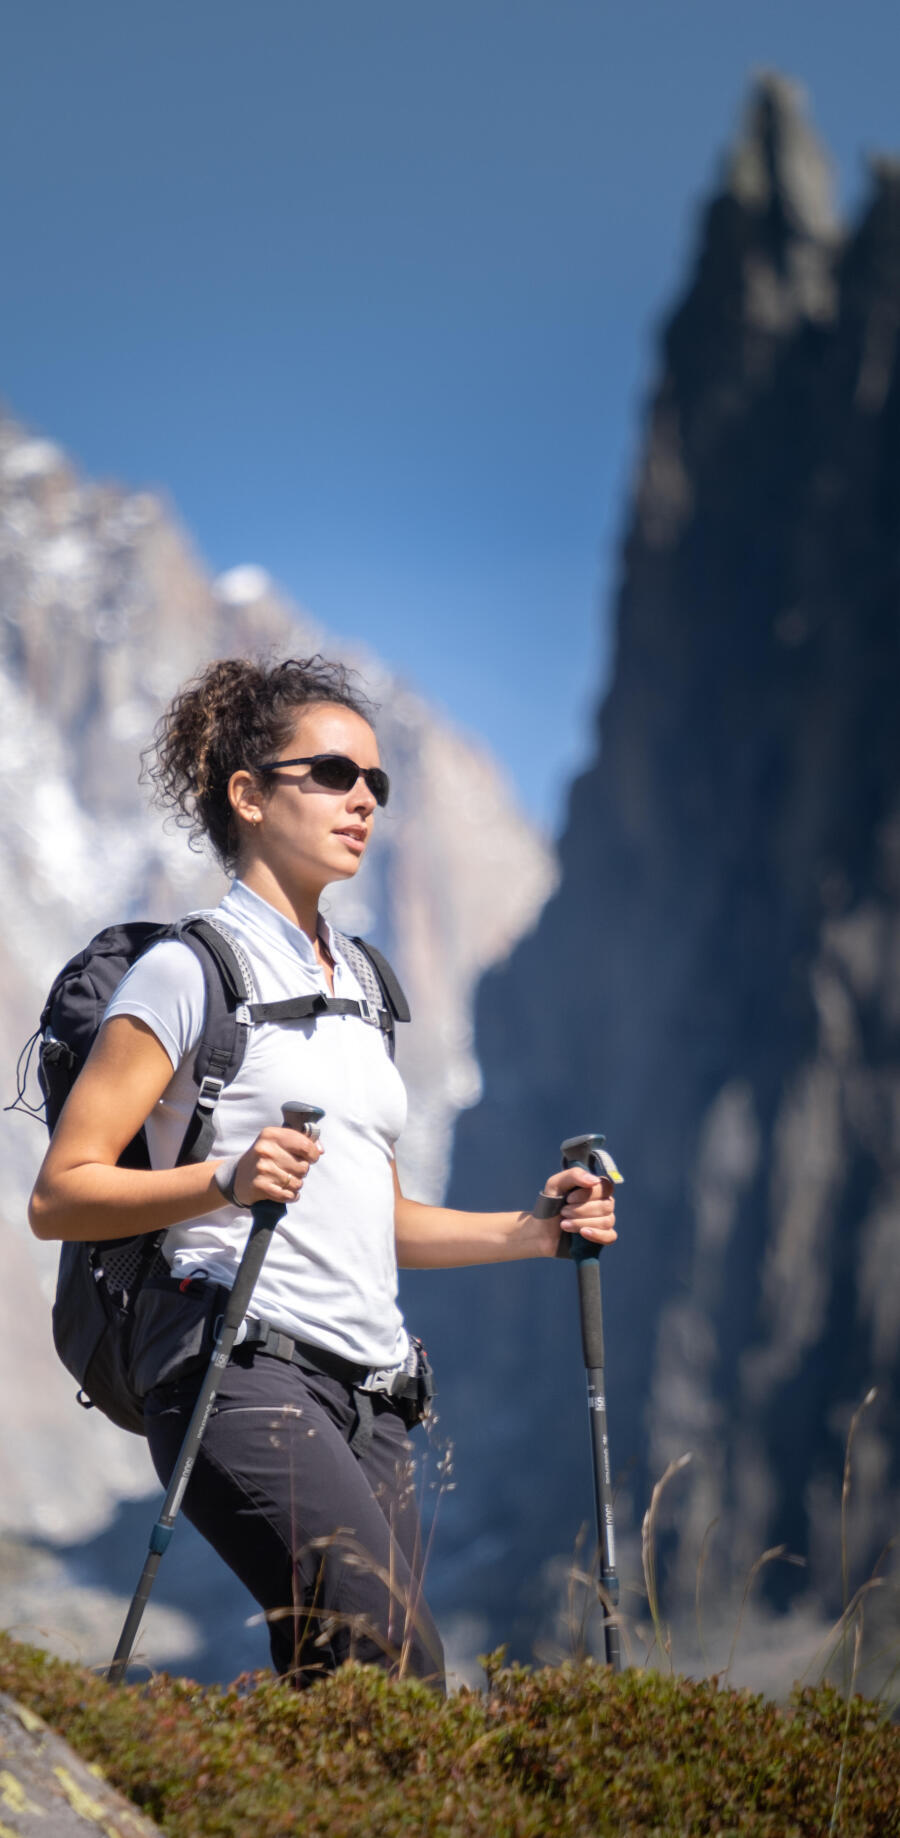 Hiking Sunglasses  5 Top-Quality Features to Look Out For